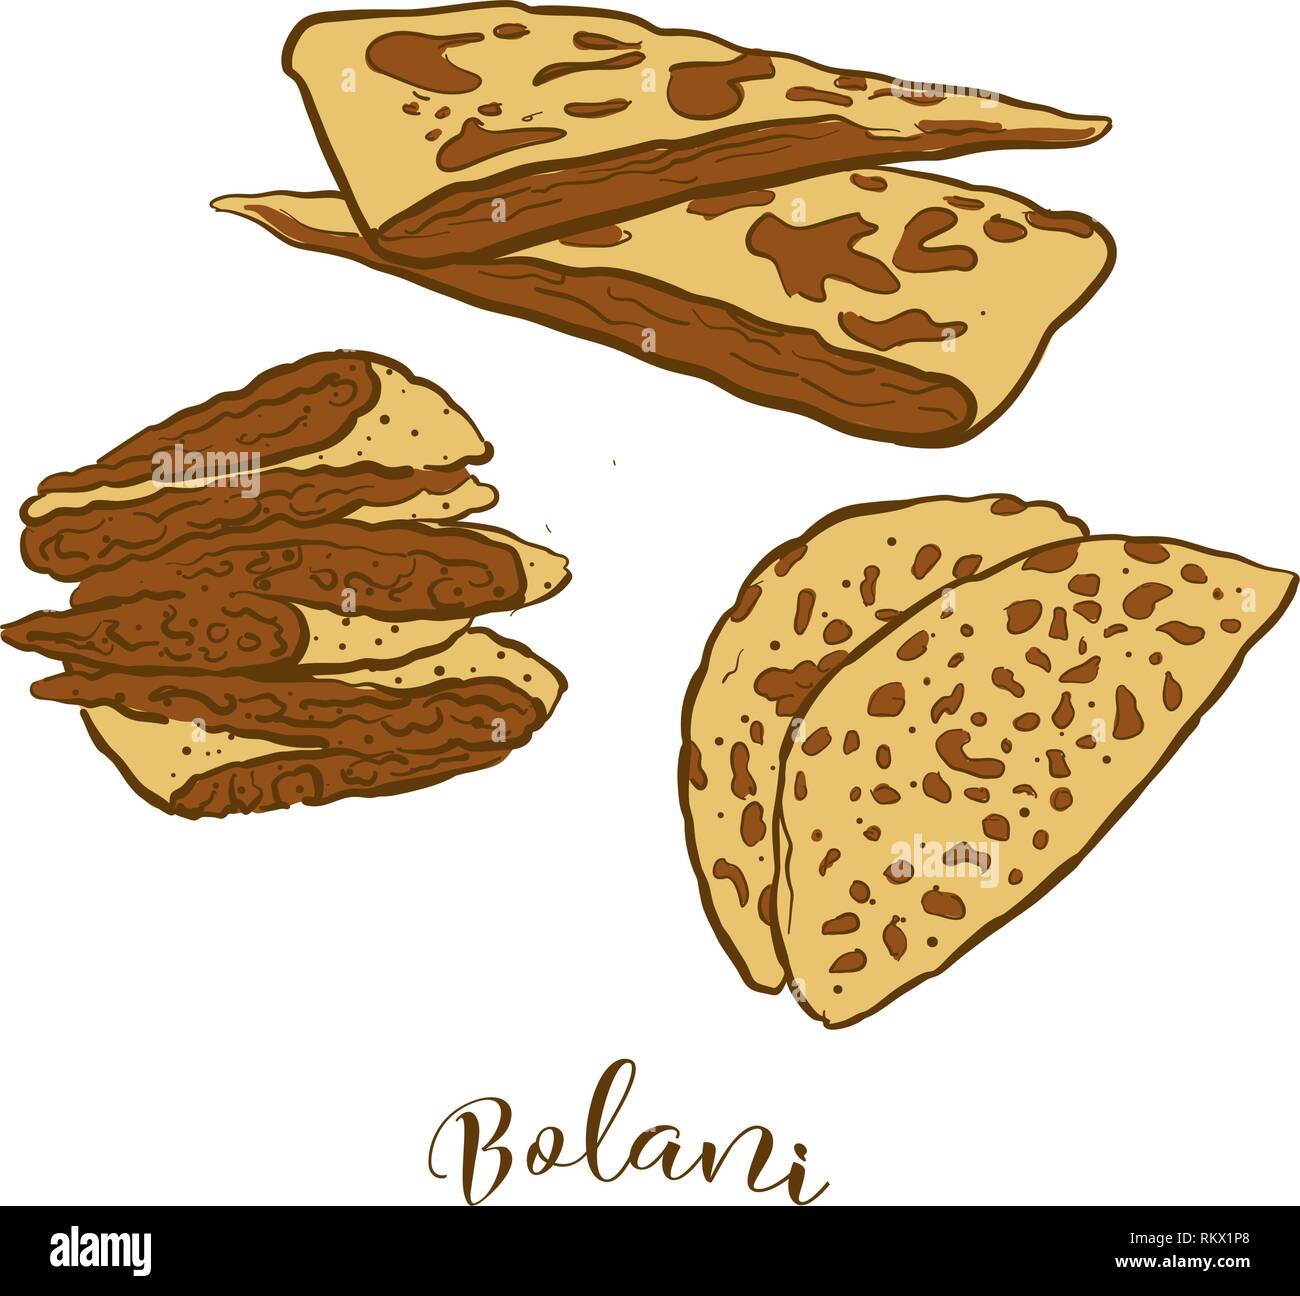 Colored sketches of Bolani bread. Vector drawing of Flatbread food, usually known in Afghanistan. Colored Bread illustration series. Stock Vector